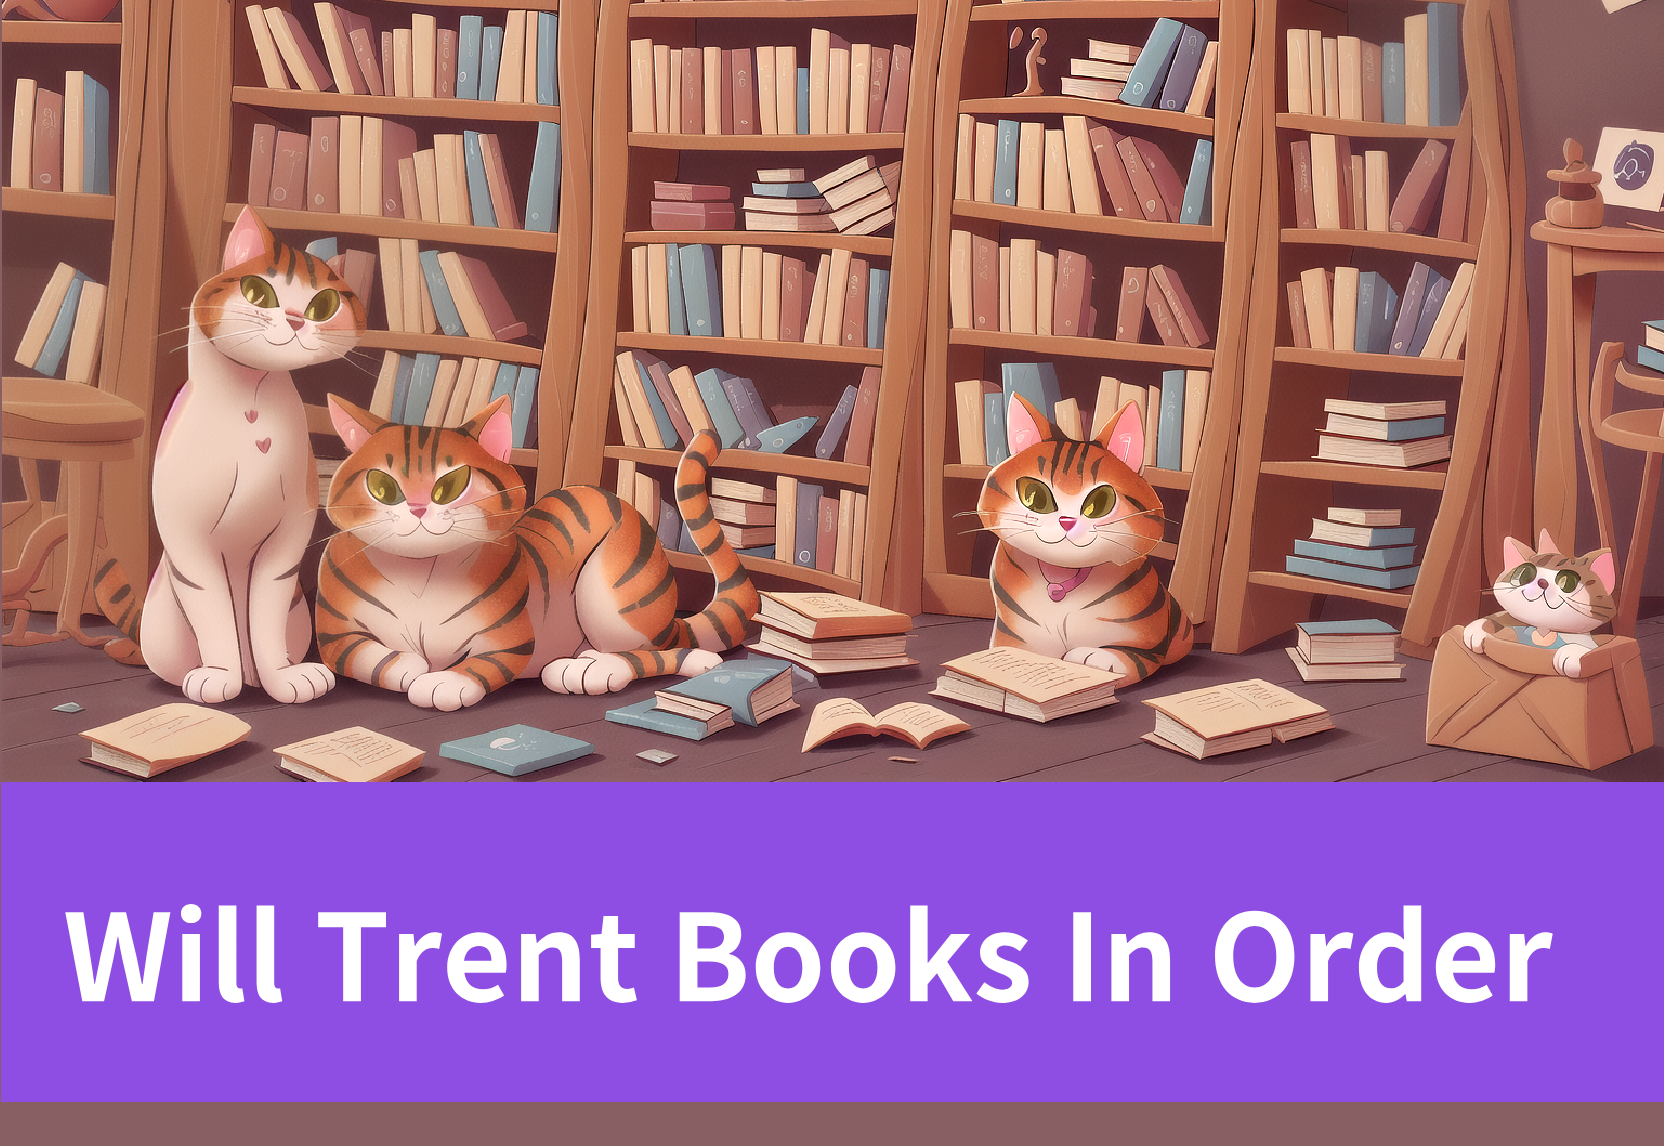 Your Checklist for Will Trent Books in Order